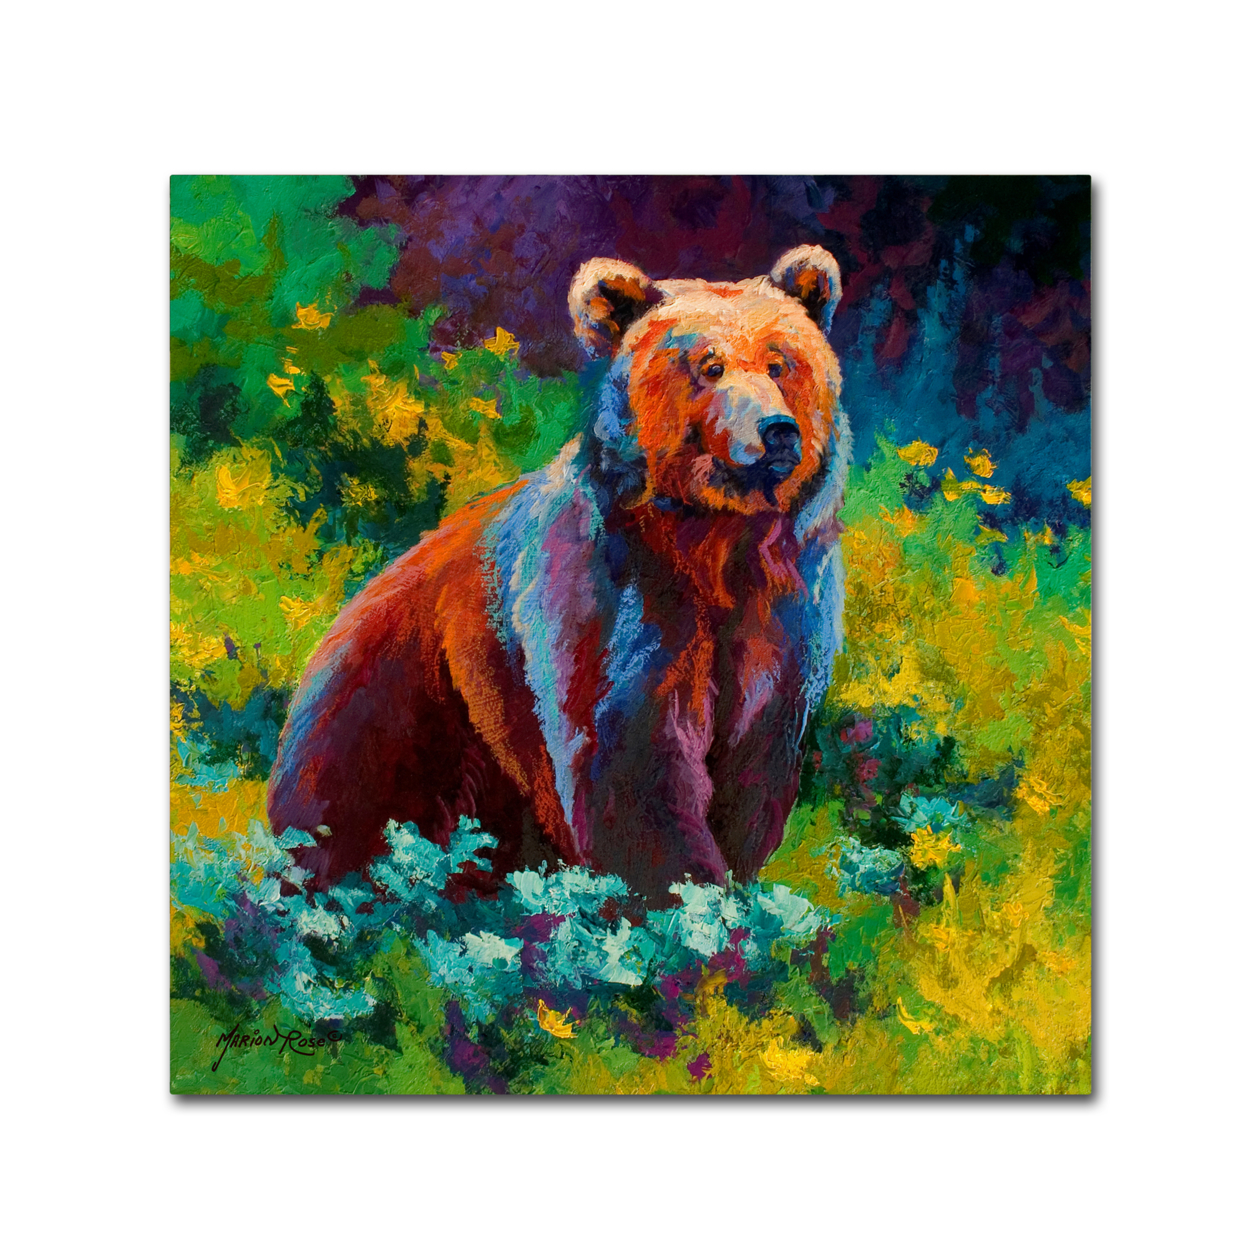 Marion Rose 'Wildflower Grizz' Ready To Hang Canvas Art 24 X 24 Inches Made In USA